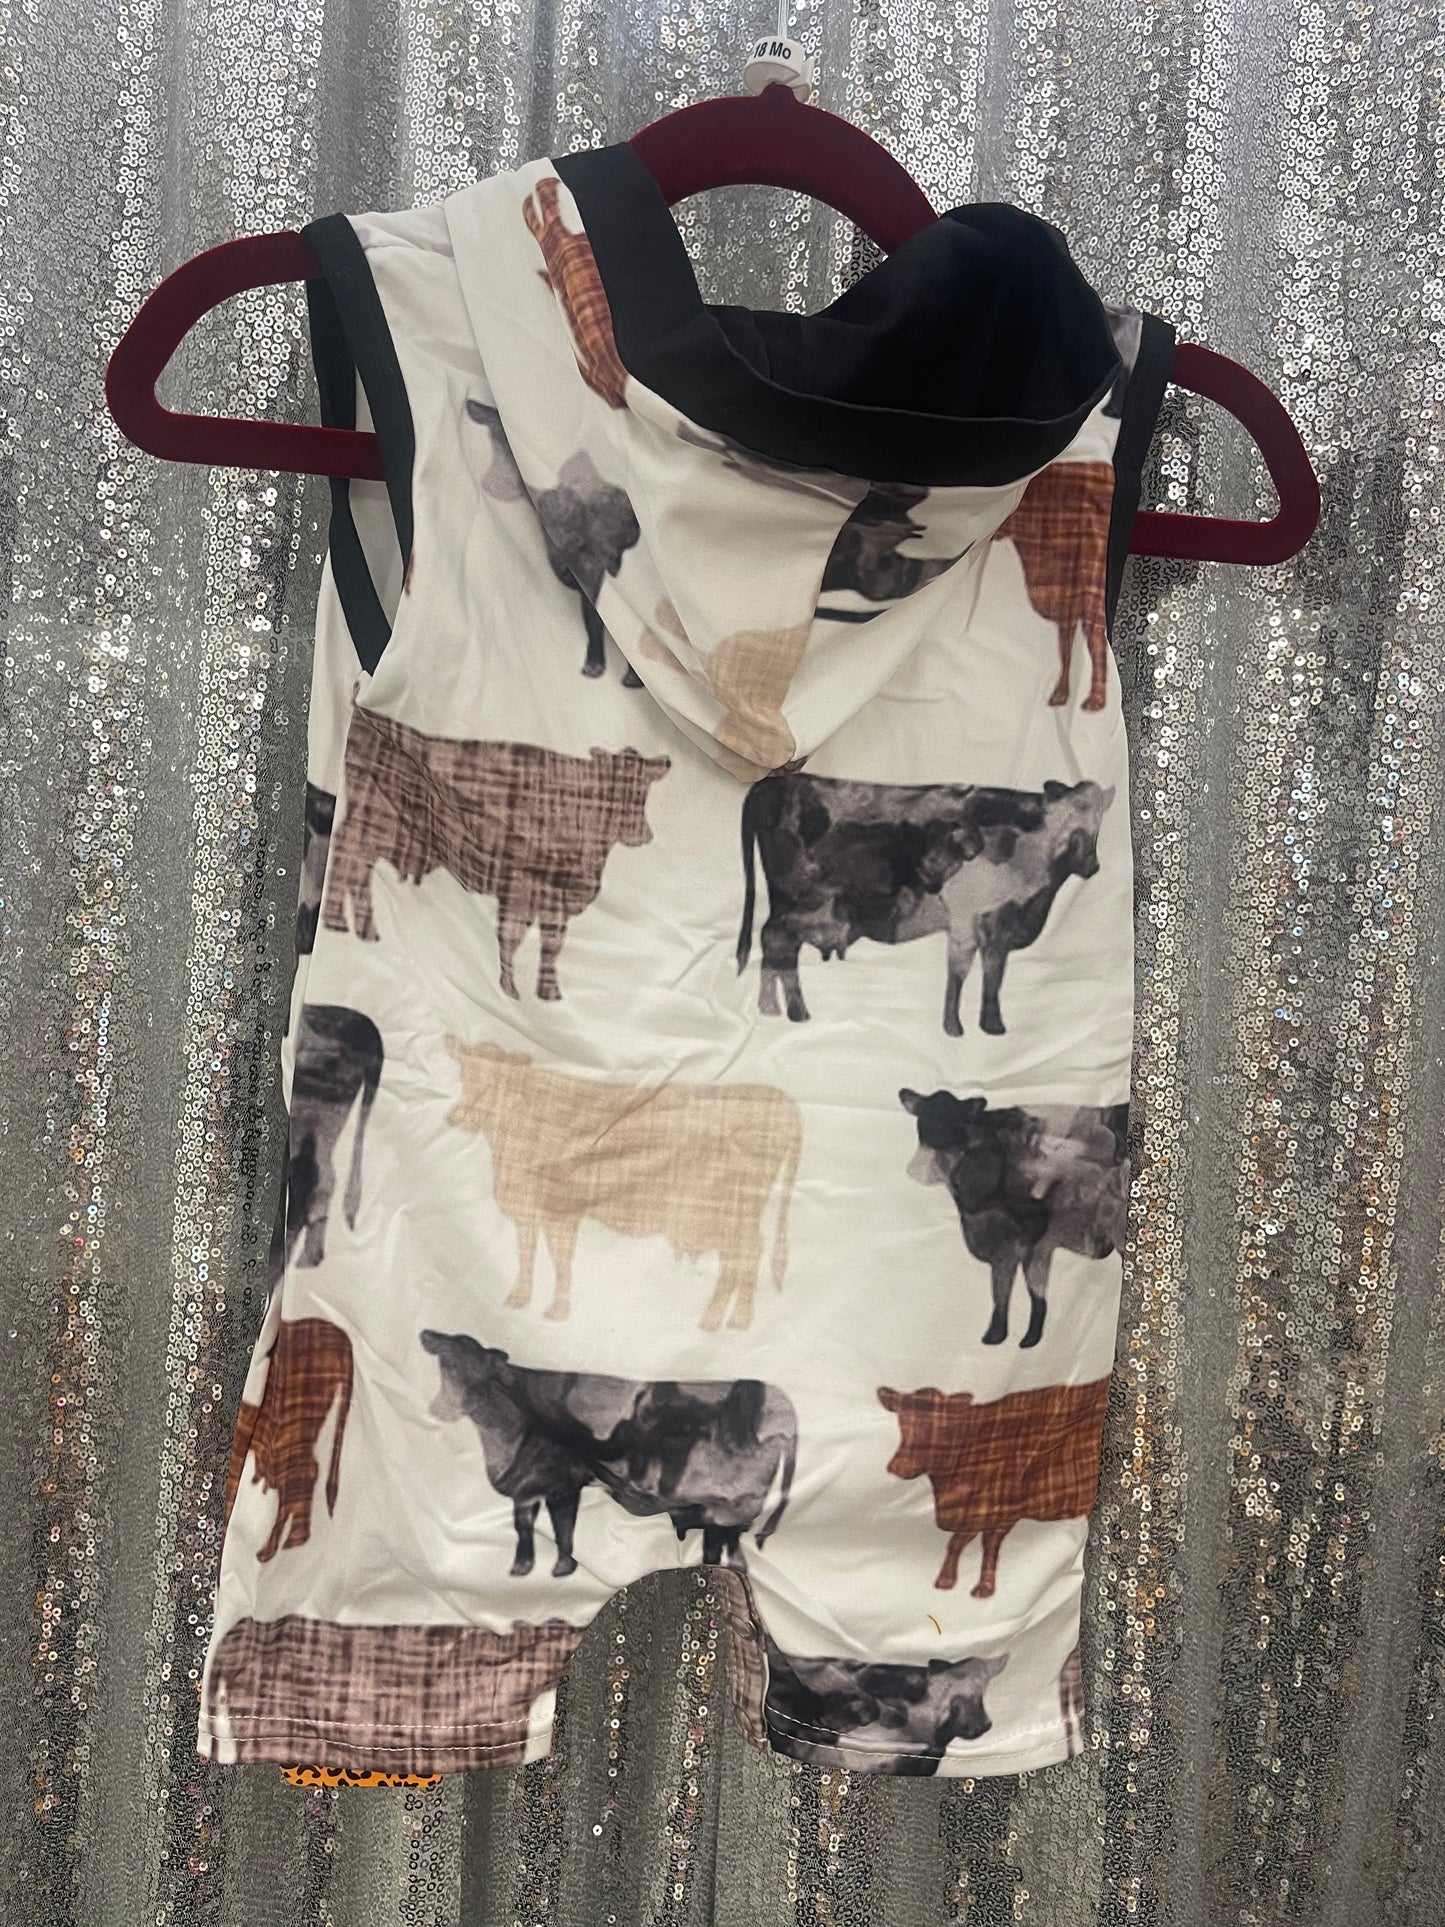 Cut off Sleeves Cow Themed Hooded Romper/Onesie w/ Pockets